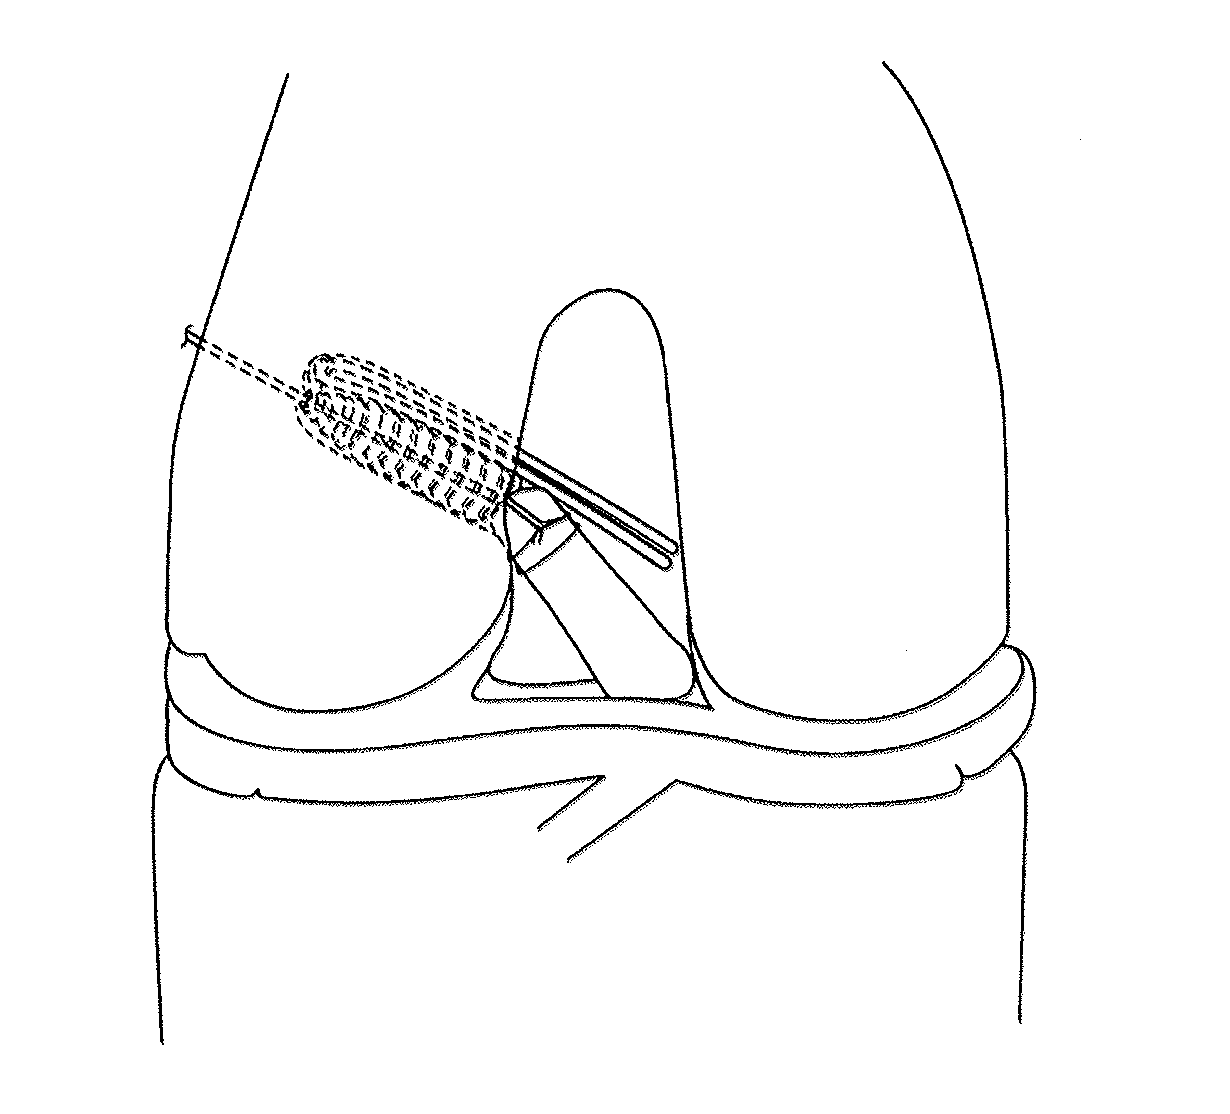 Transosteal anchoring methods for tissue repair